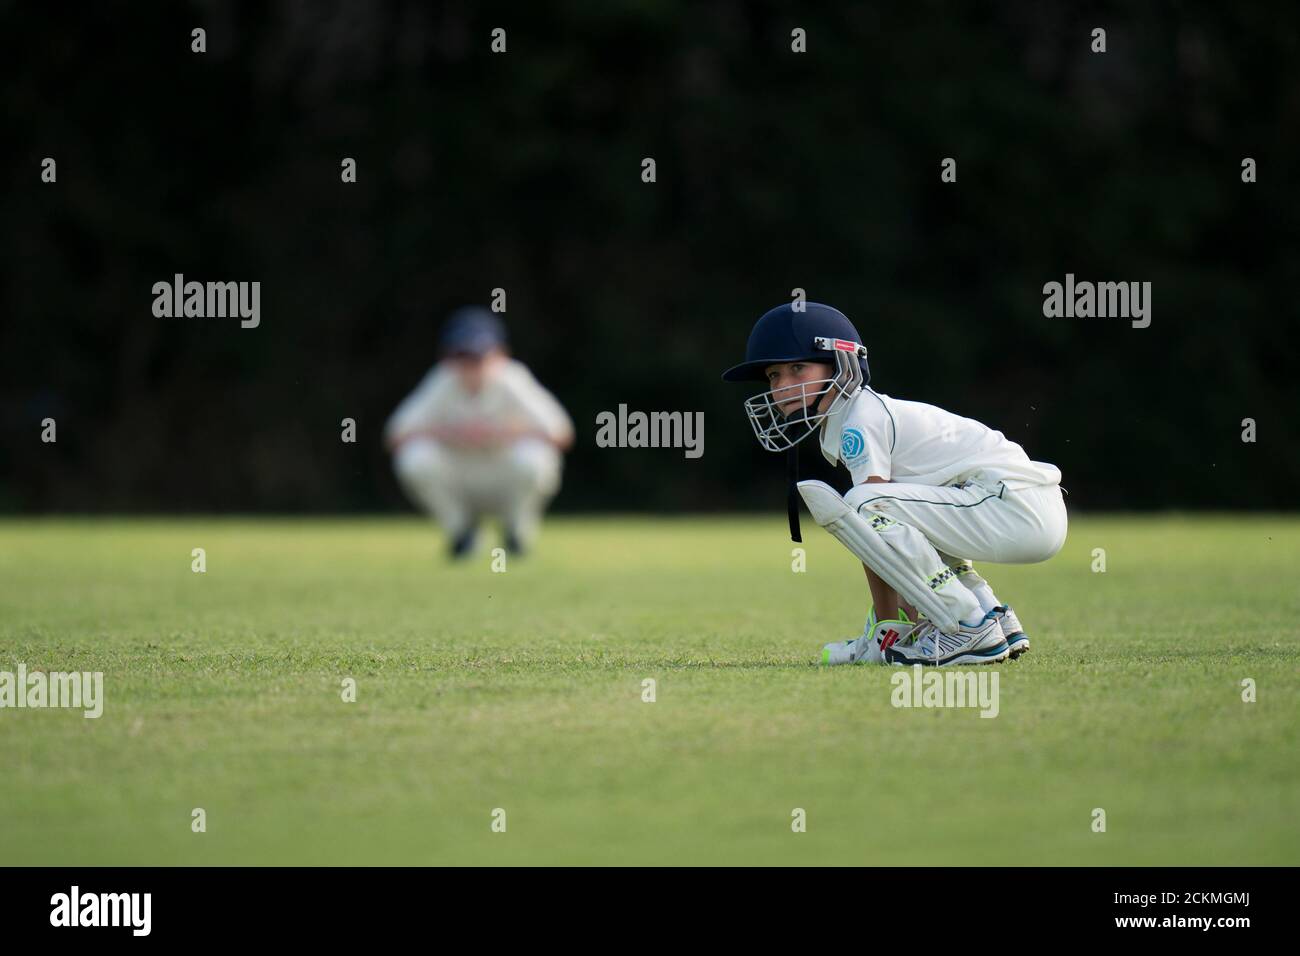 Young boy wicket keeping Stock Photo